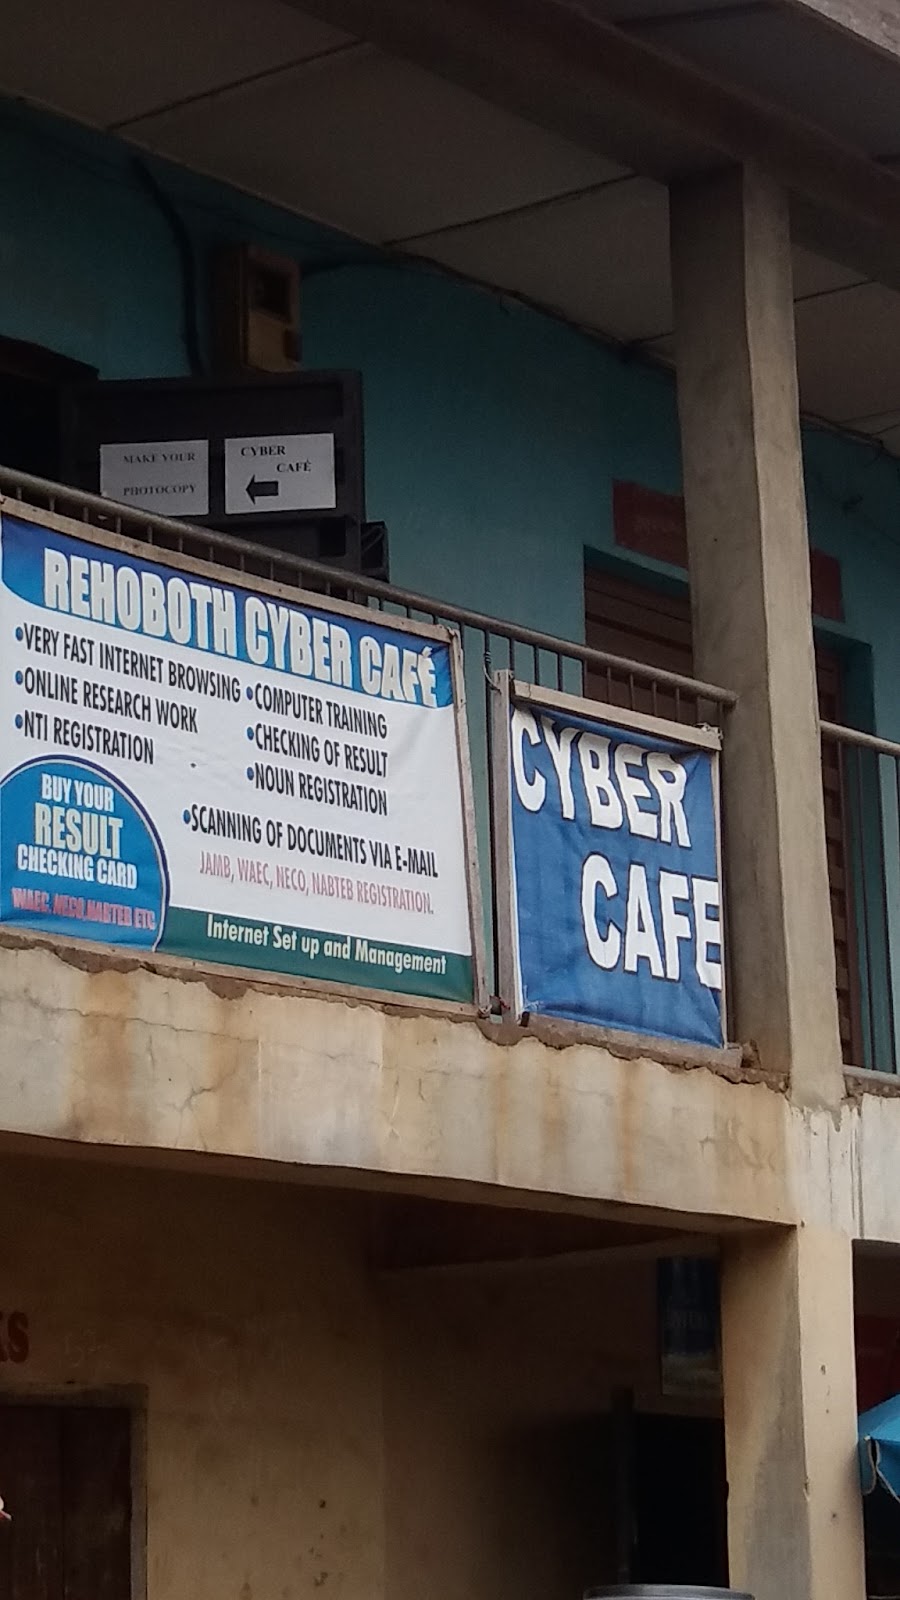 Rehoboth Cyber Caf